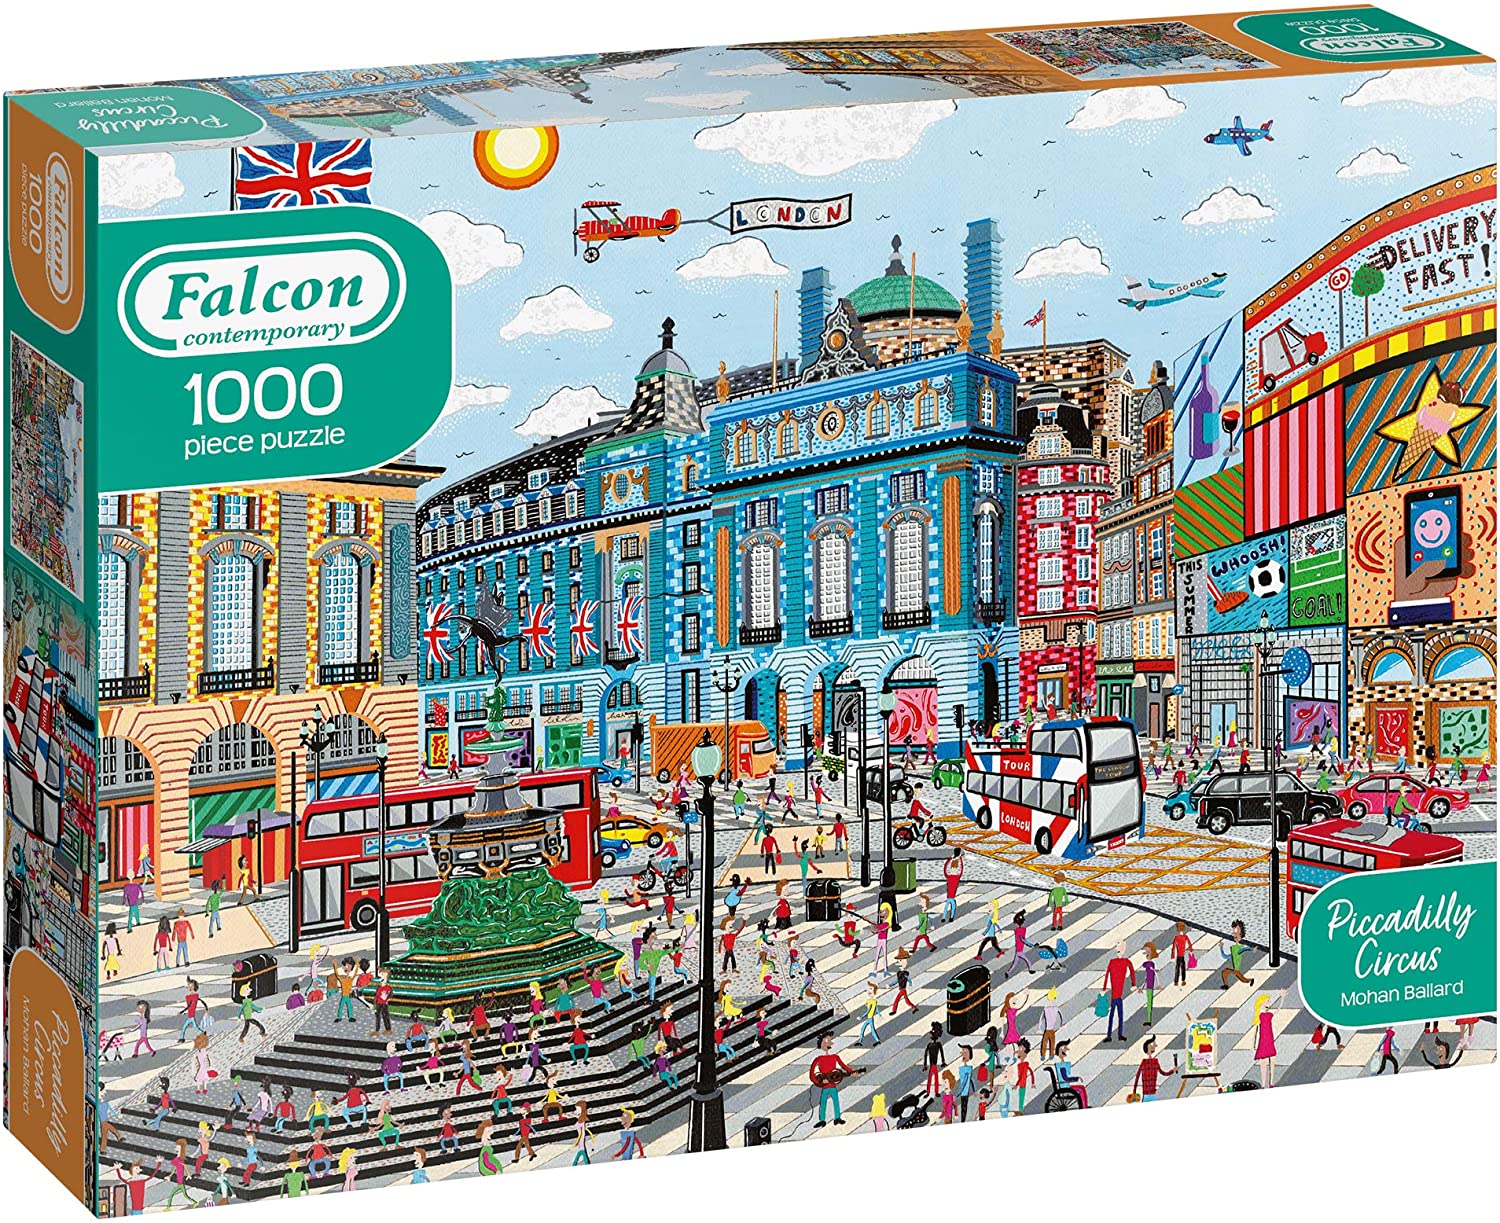 New Jumbo Falcon Contemporary Range Of Jigsaw Puzzles Now In Stock At Phillips Toys